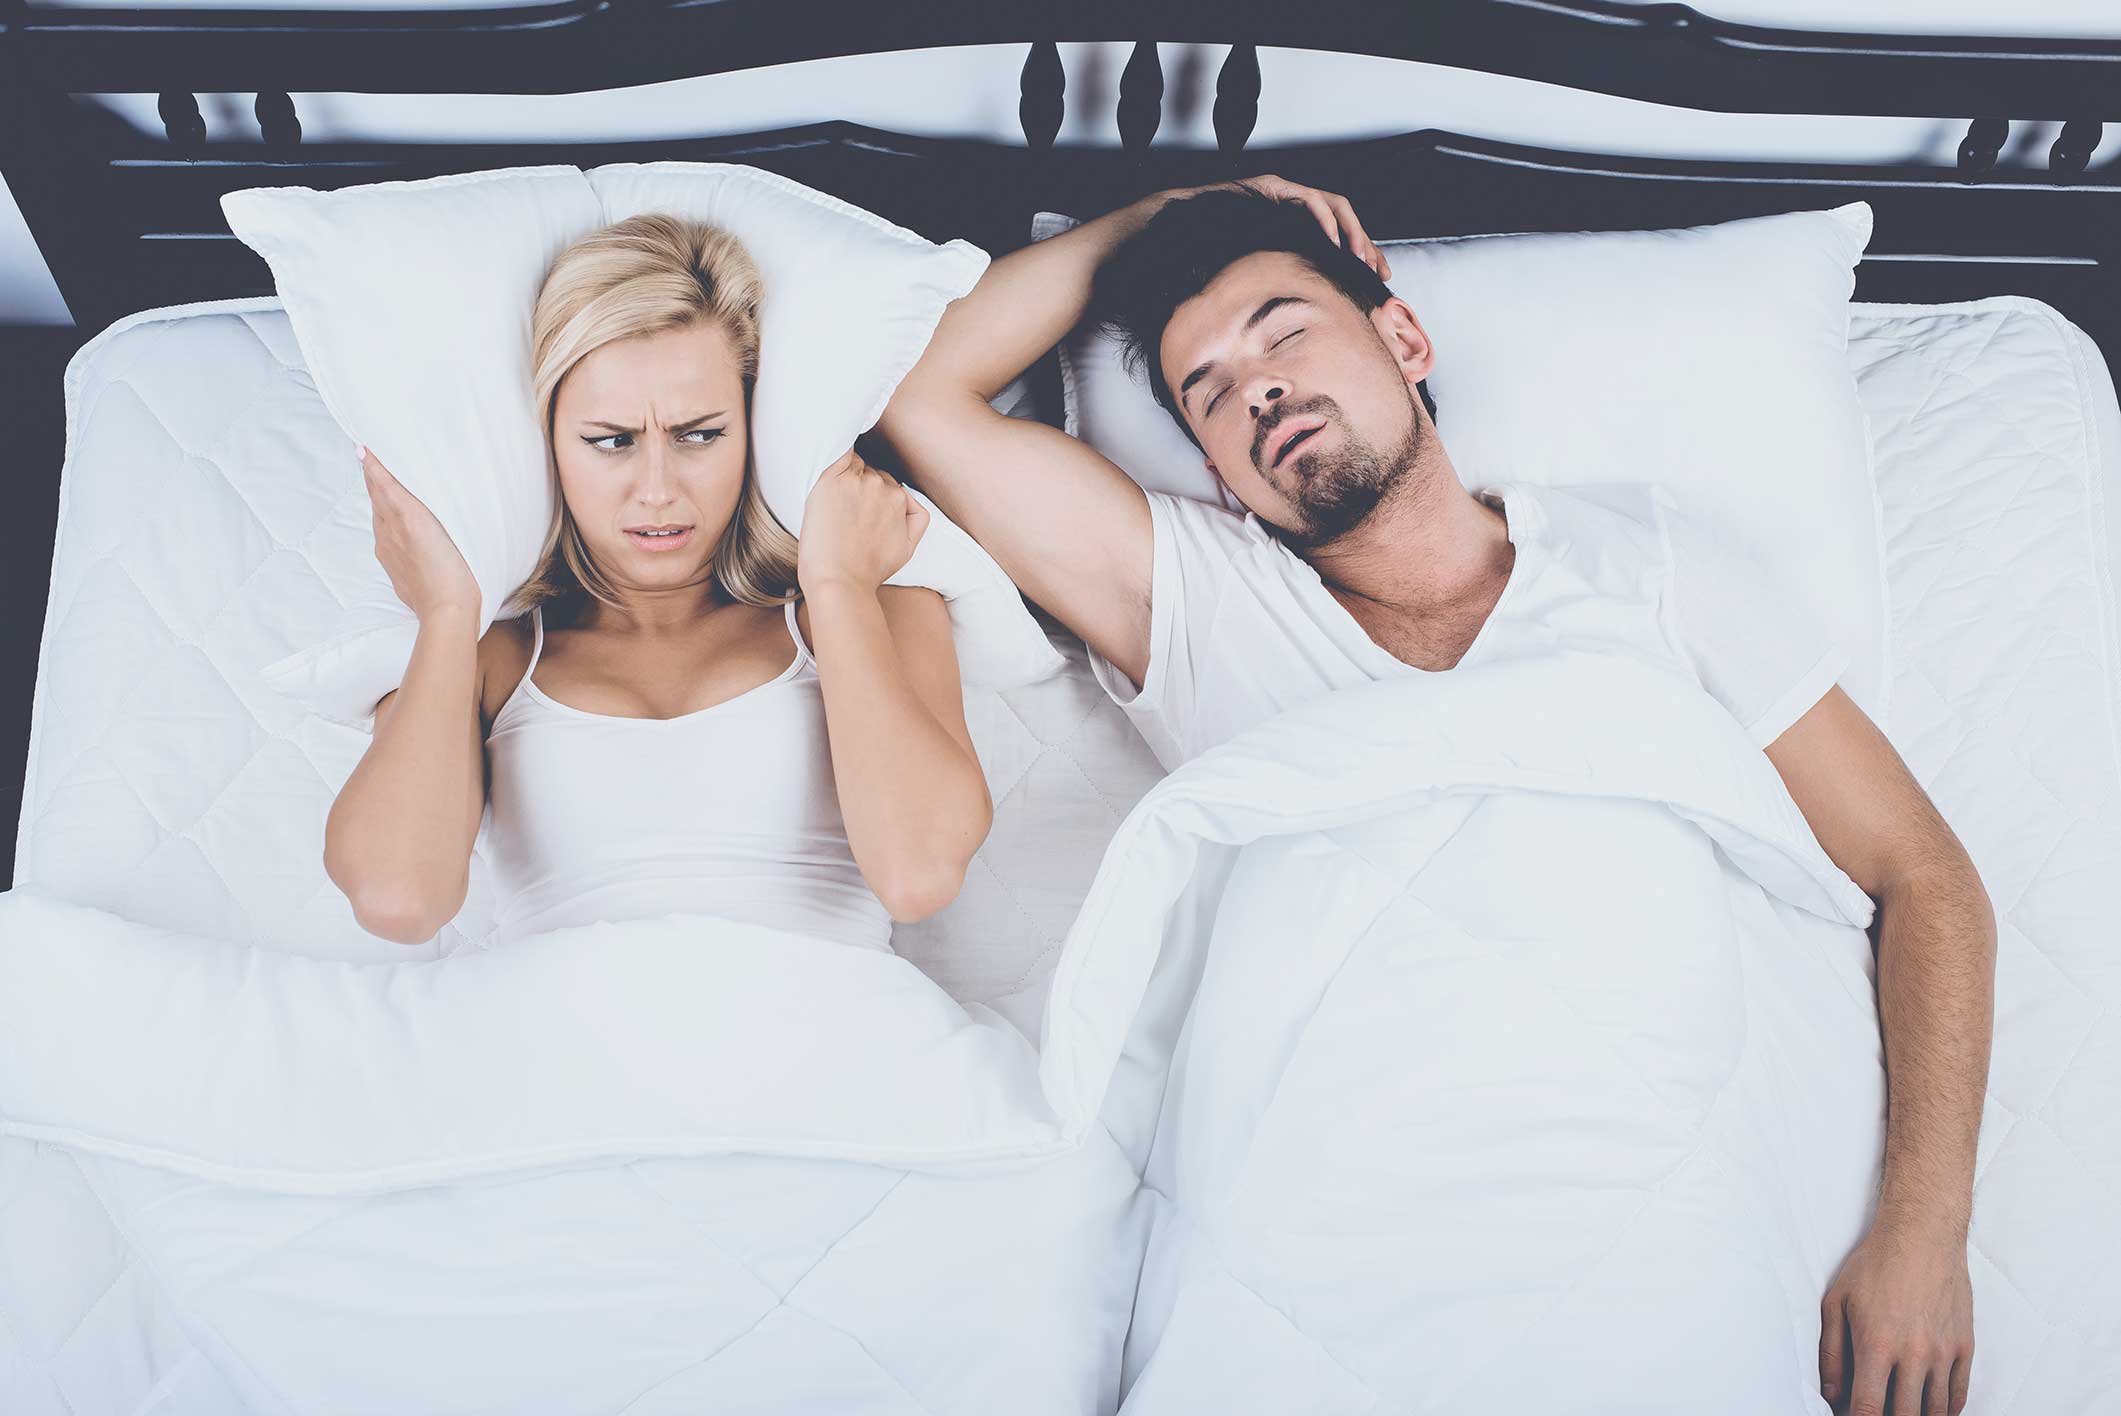 Woman unable to sleep because of her husband's snoring